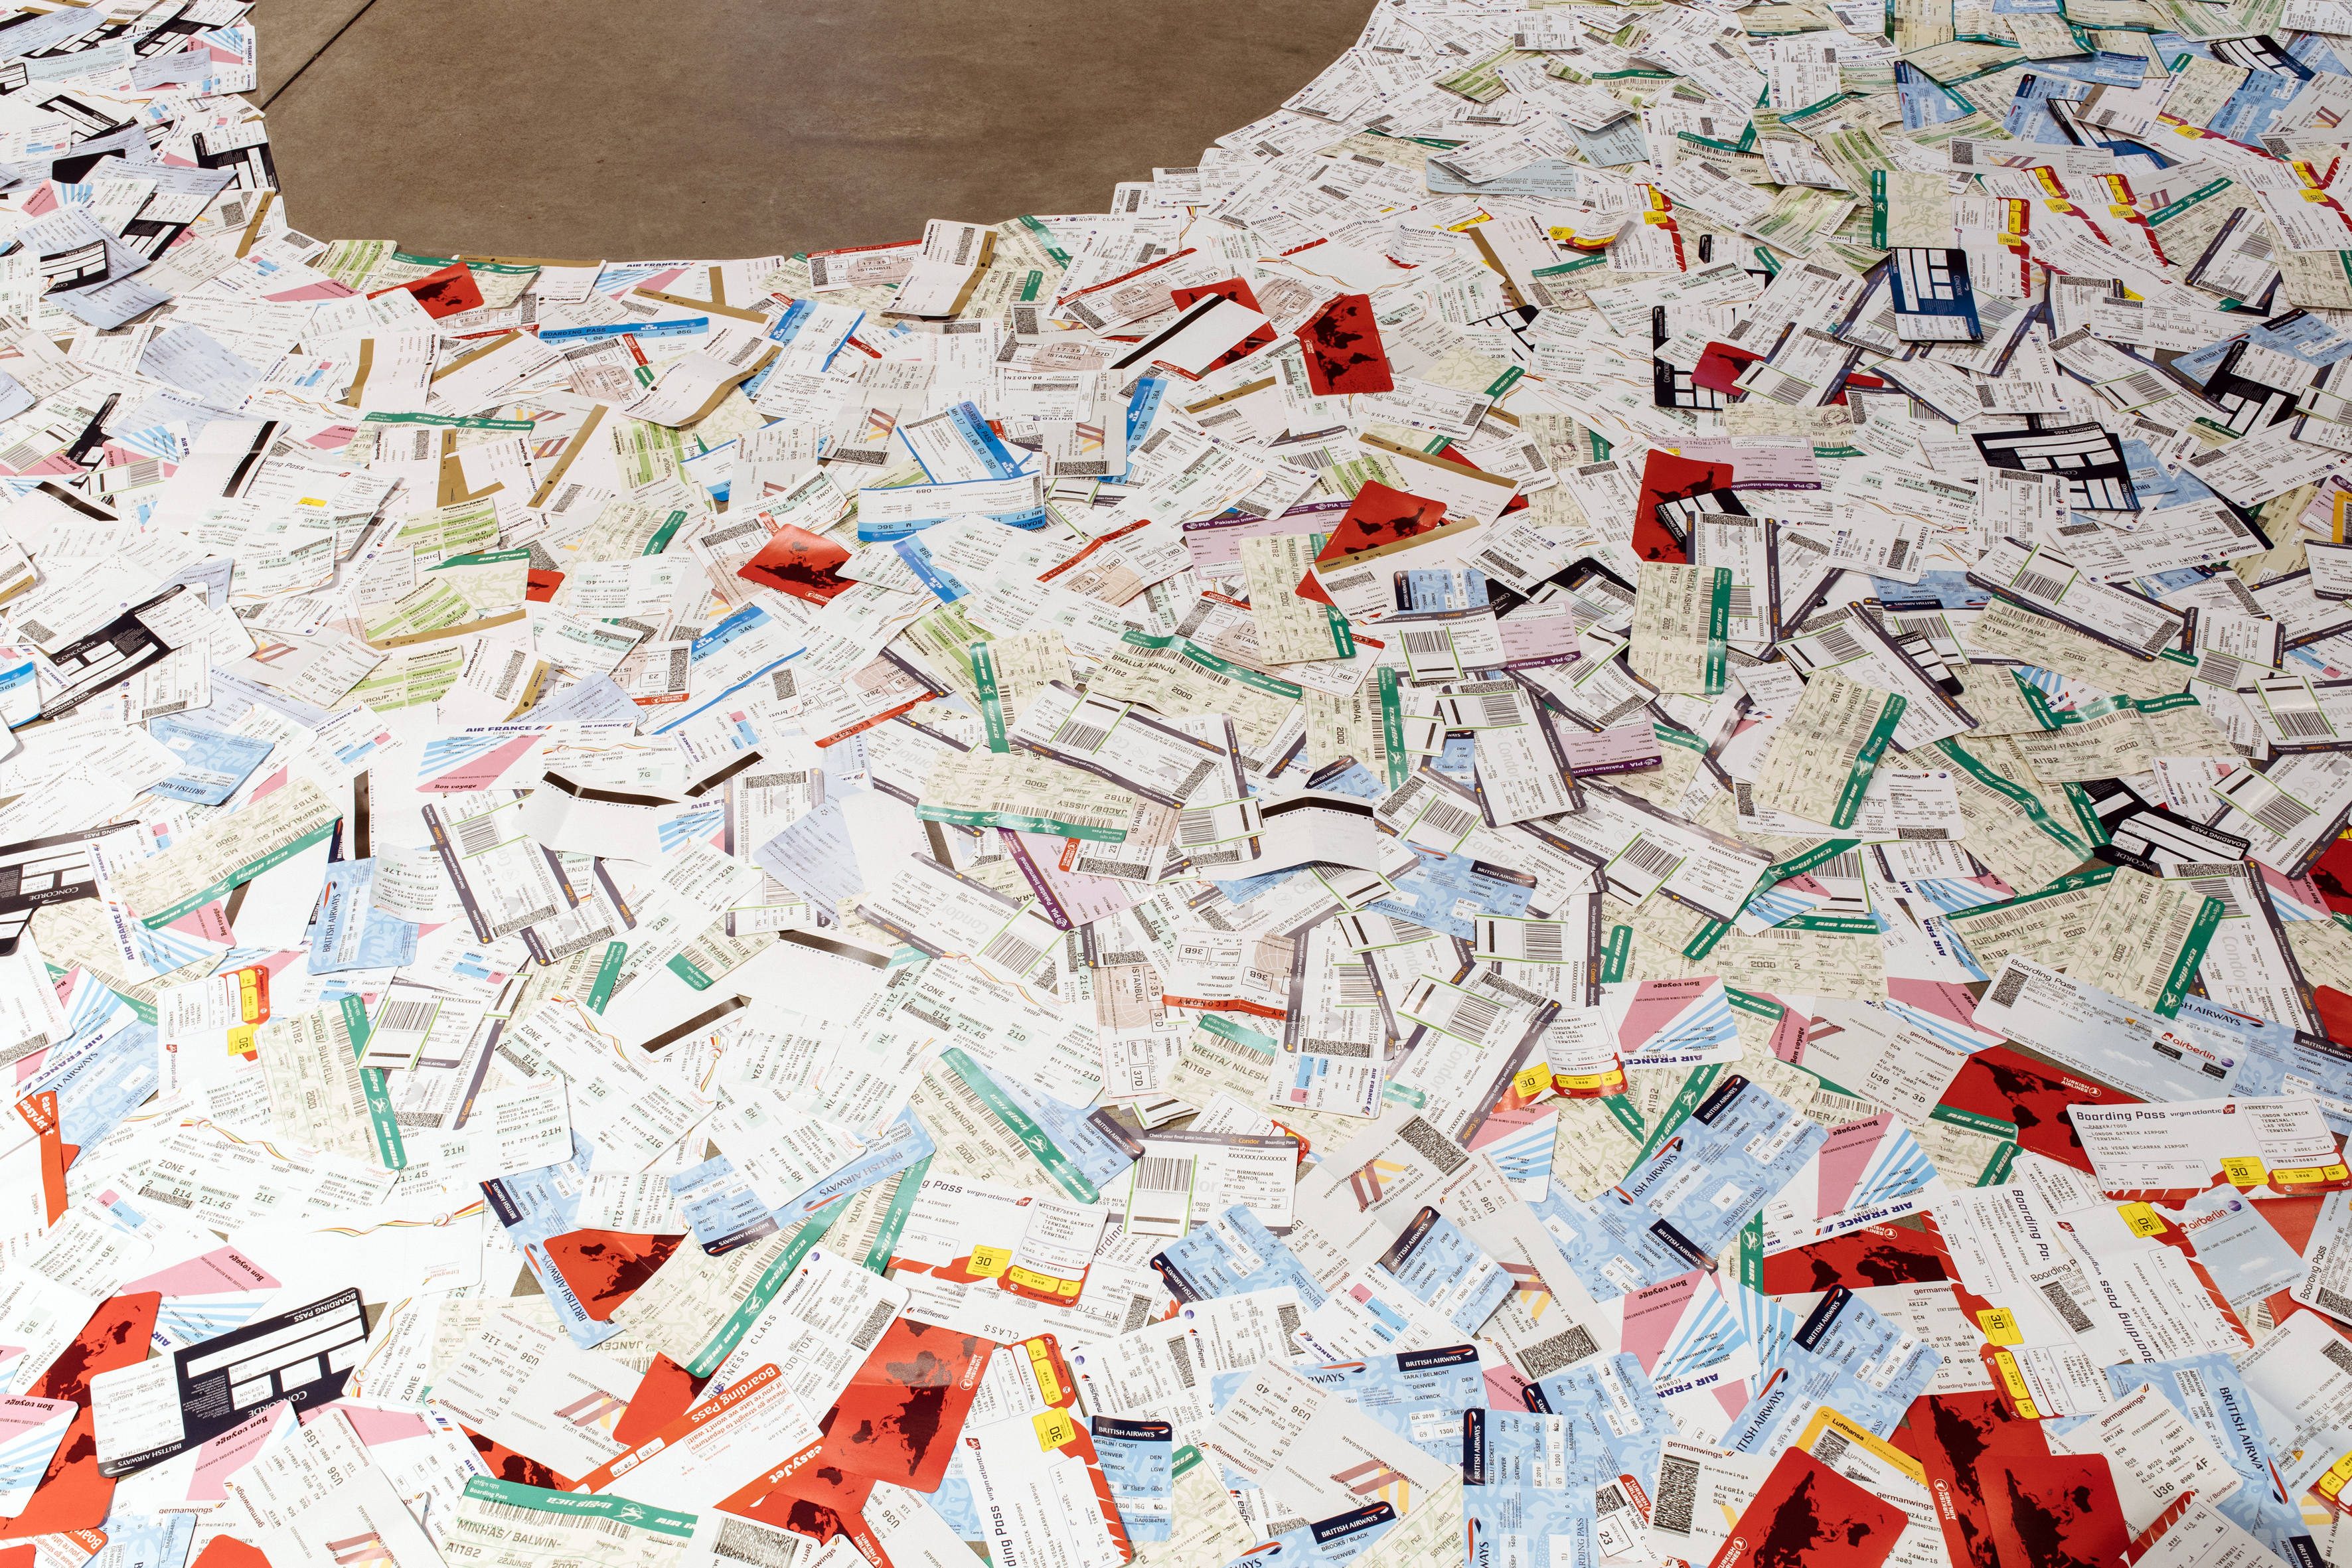 empty seats - 2022 - material: about 5000 replicated airplane tickets of different airlines, patafix glue pads, 1100 × 1 × 547 cm